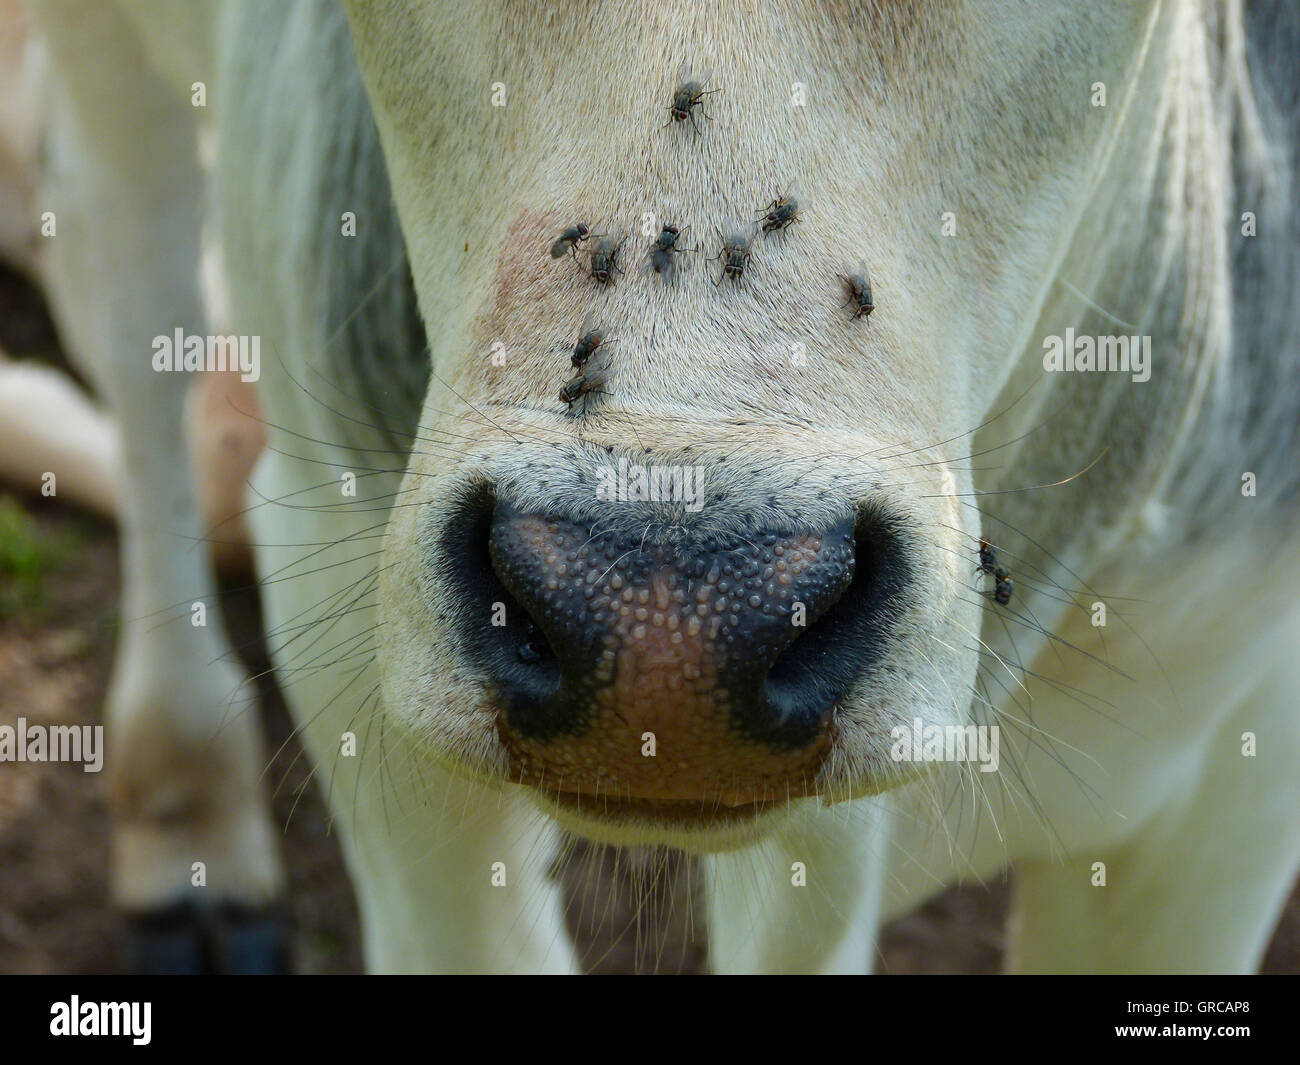 Horse, Snout Of A White Horse With Lots Of Flies Stock Photo